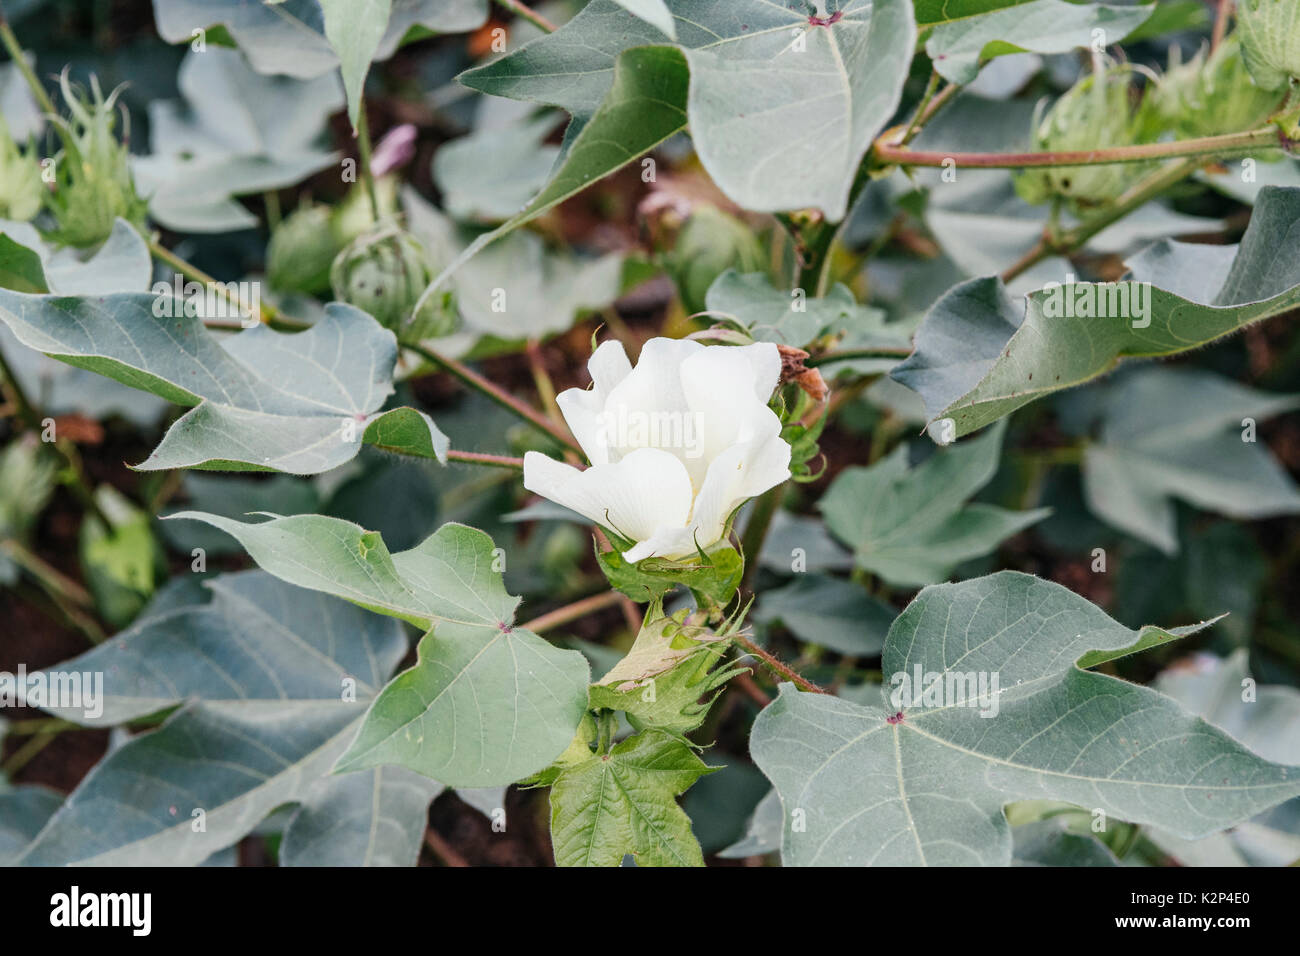 https://c8.alamy.com/comp/K2P4E0/close-up-of-cotton-plant-flowering-in-mid-season-showing-healthy-growth-K2P4E0.jpg